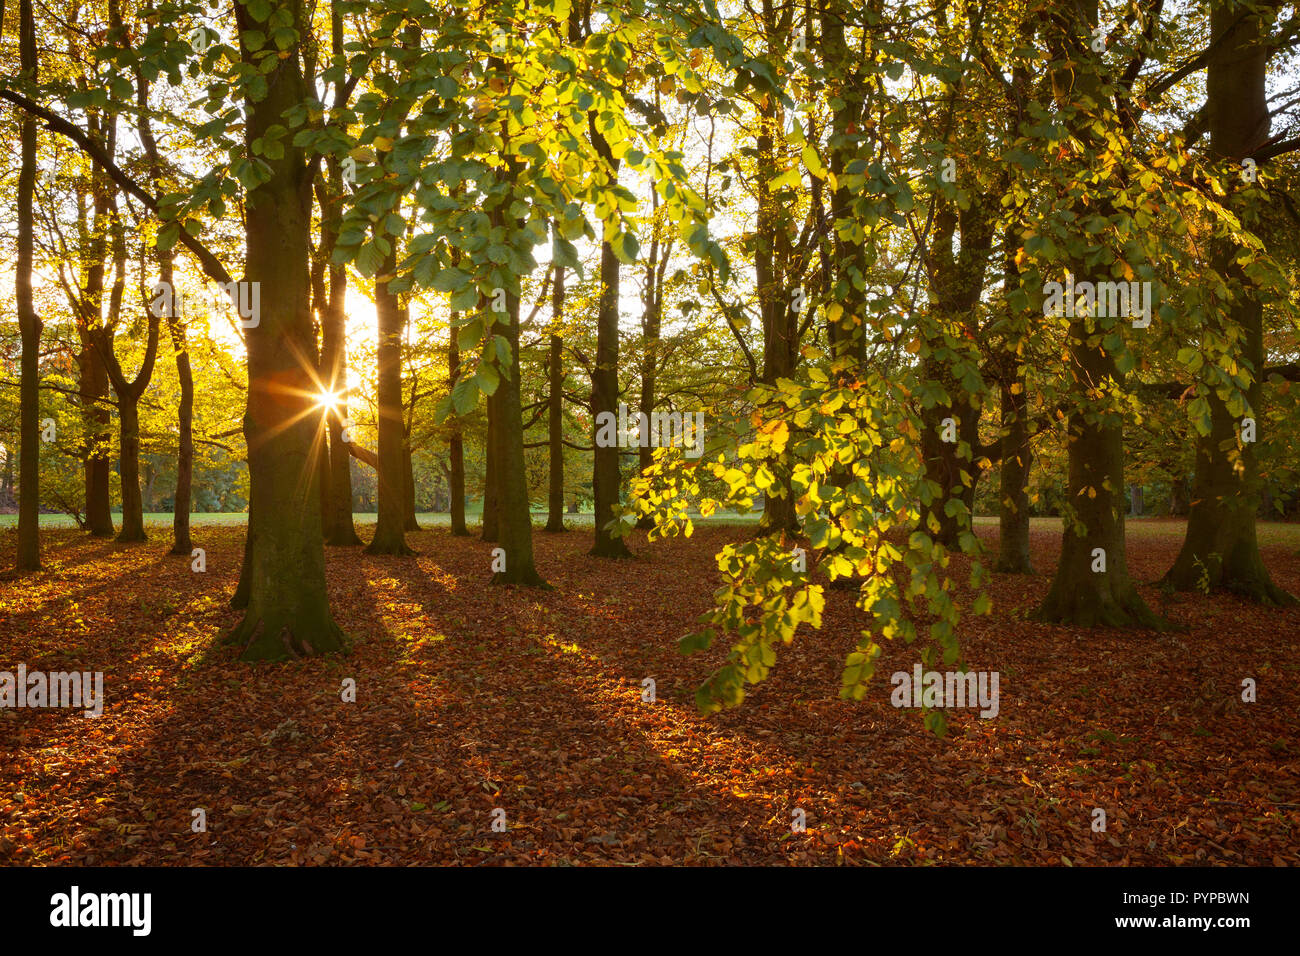 Barton-upon-Humber, North Lincolnshire, UK. 29th Oct, 2018. UK Weather: Late evening light on Beech Trees in Baysgarth Park in Autumn. Barton-upon-Humber, North Lincolnshire, UK. 29th Oct, 2018. Credit: LEE BEEL/Alamy Live News Stock Photo